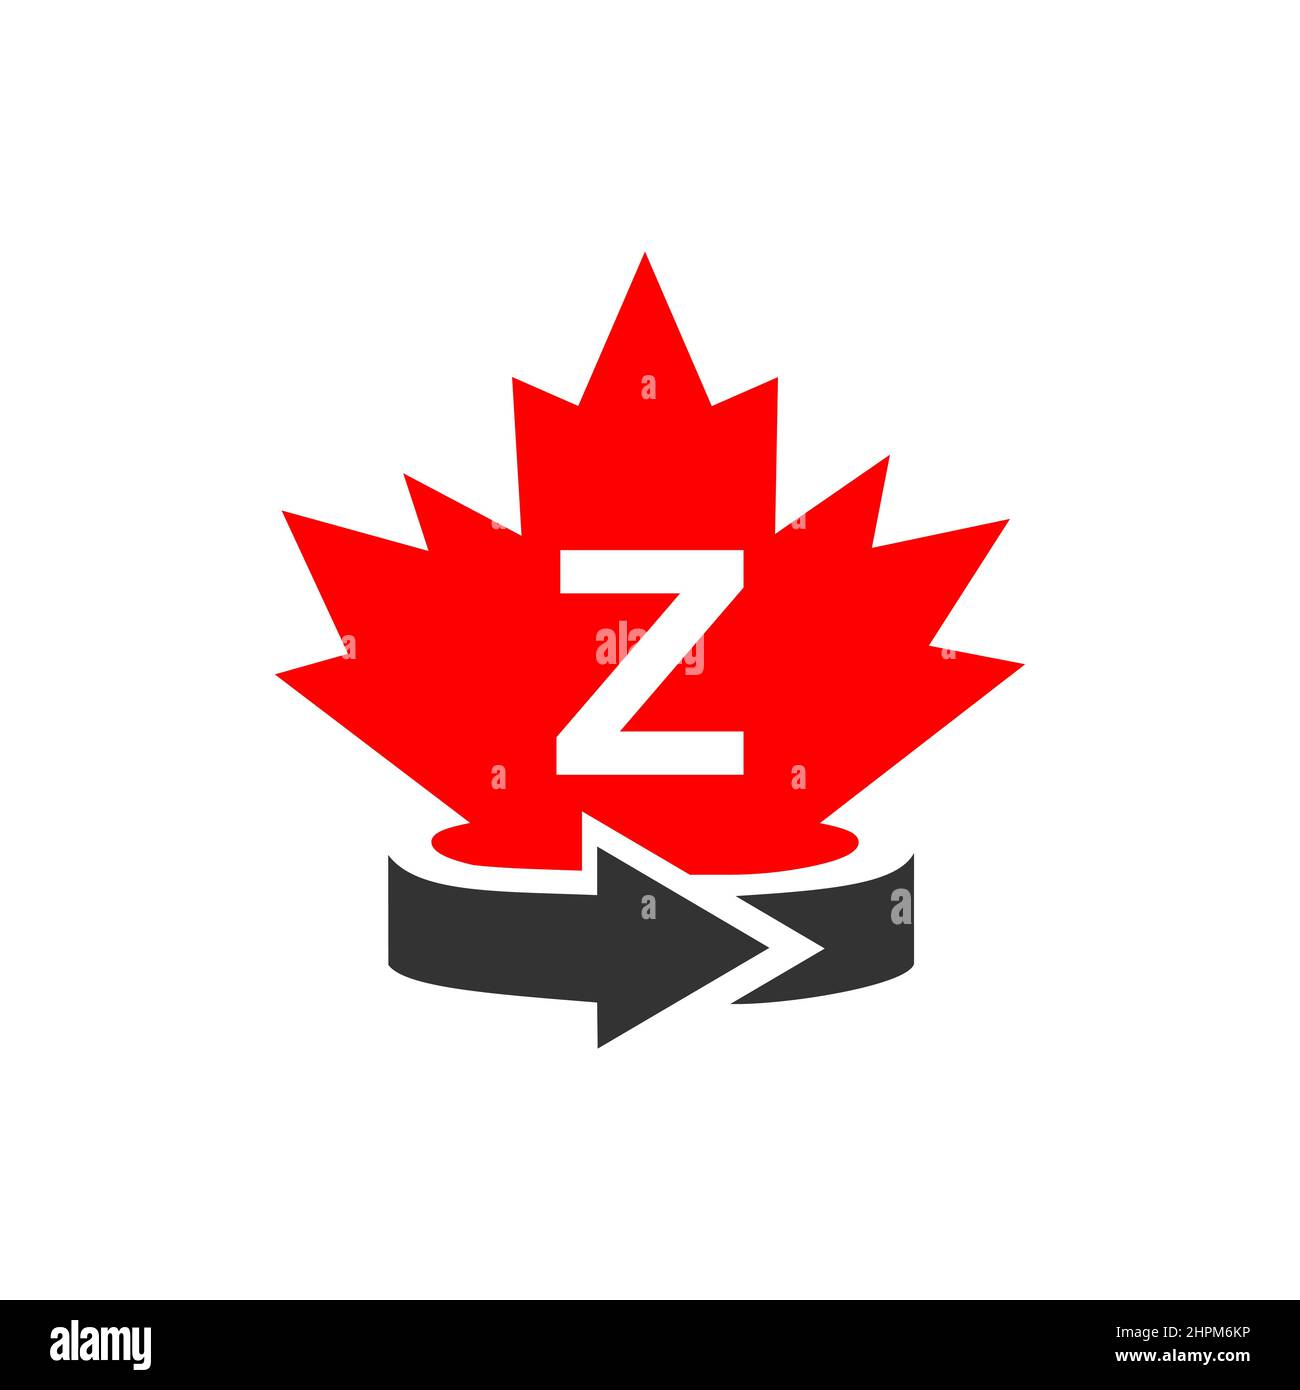 Canadian Maple Leaf Logo Design On Letter Z Template. Red Maple Canadian Logotype With Z Letter Vector Stock Vector